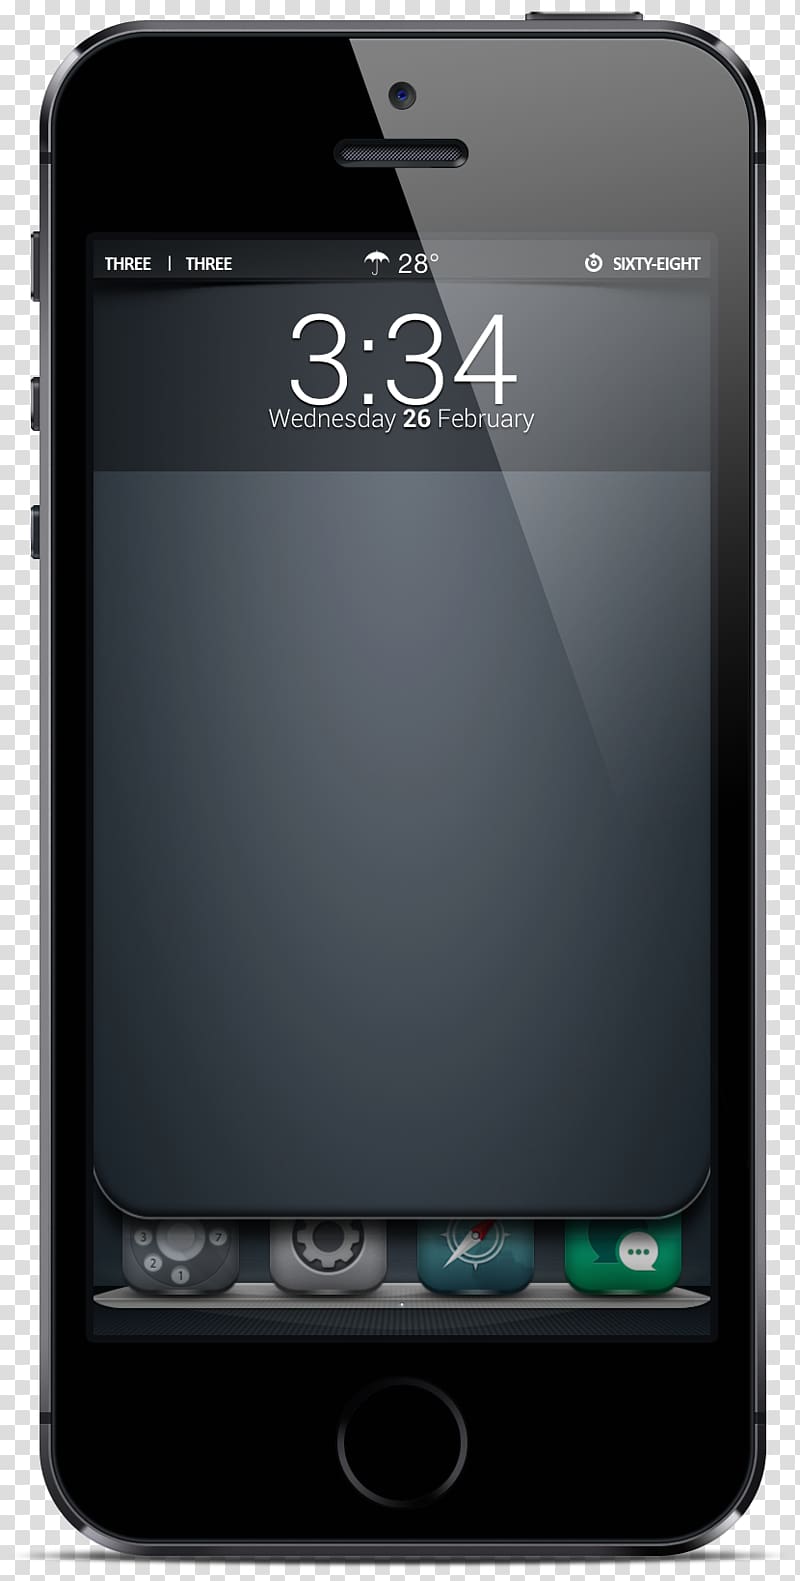 iPhone 5 iPhone 4S iPhone 7 iOS jailbreaking, weatherboarding transparent background PNG clipart